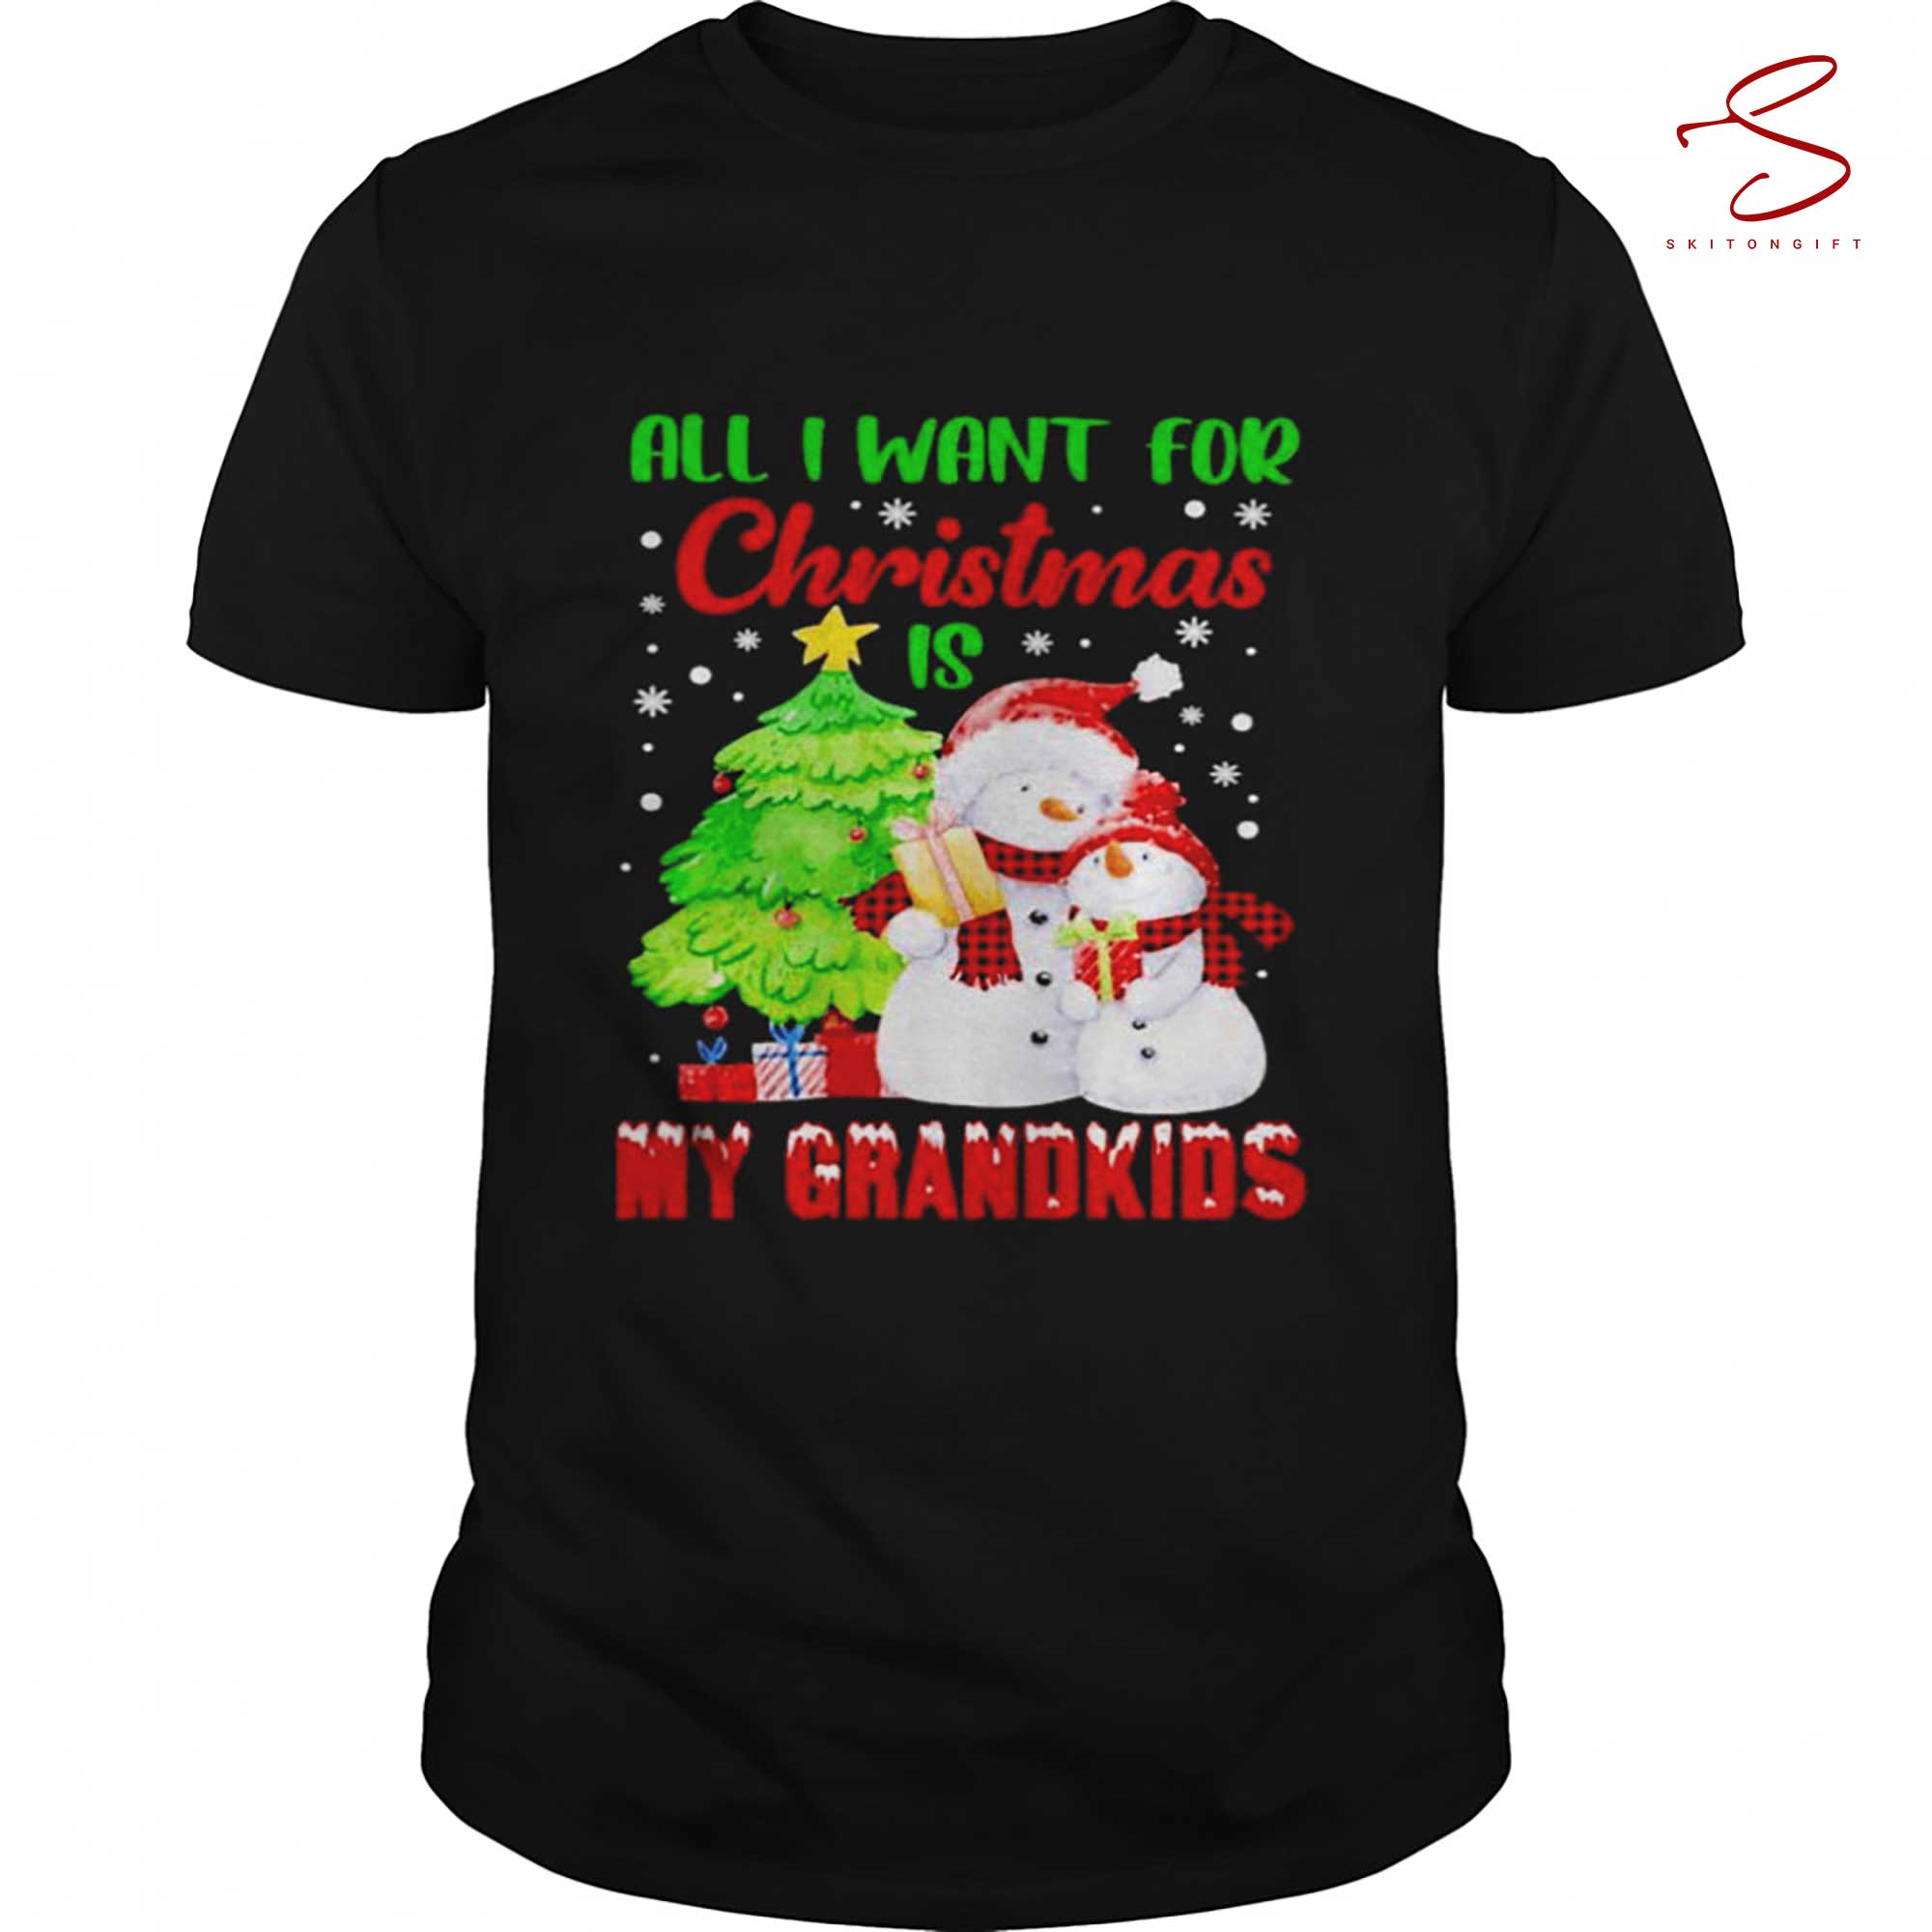 Skitongift Snowman All I Want For Christmas Is My Grandkids Shirt